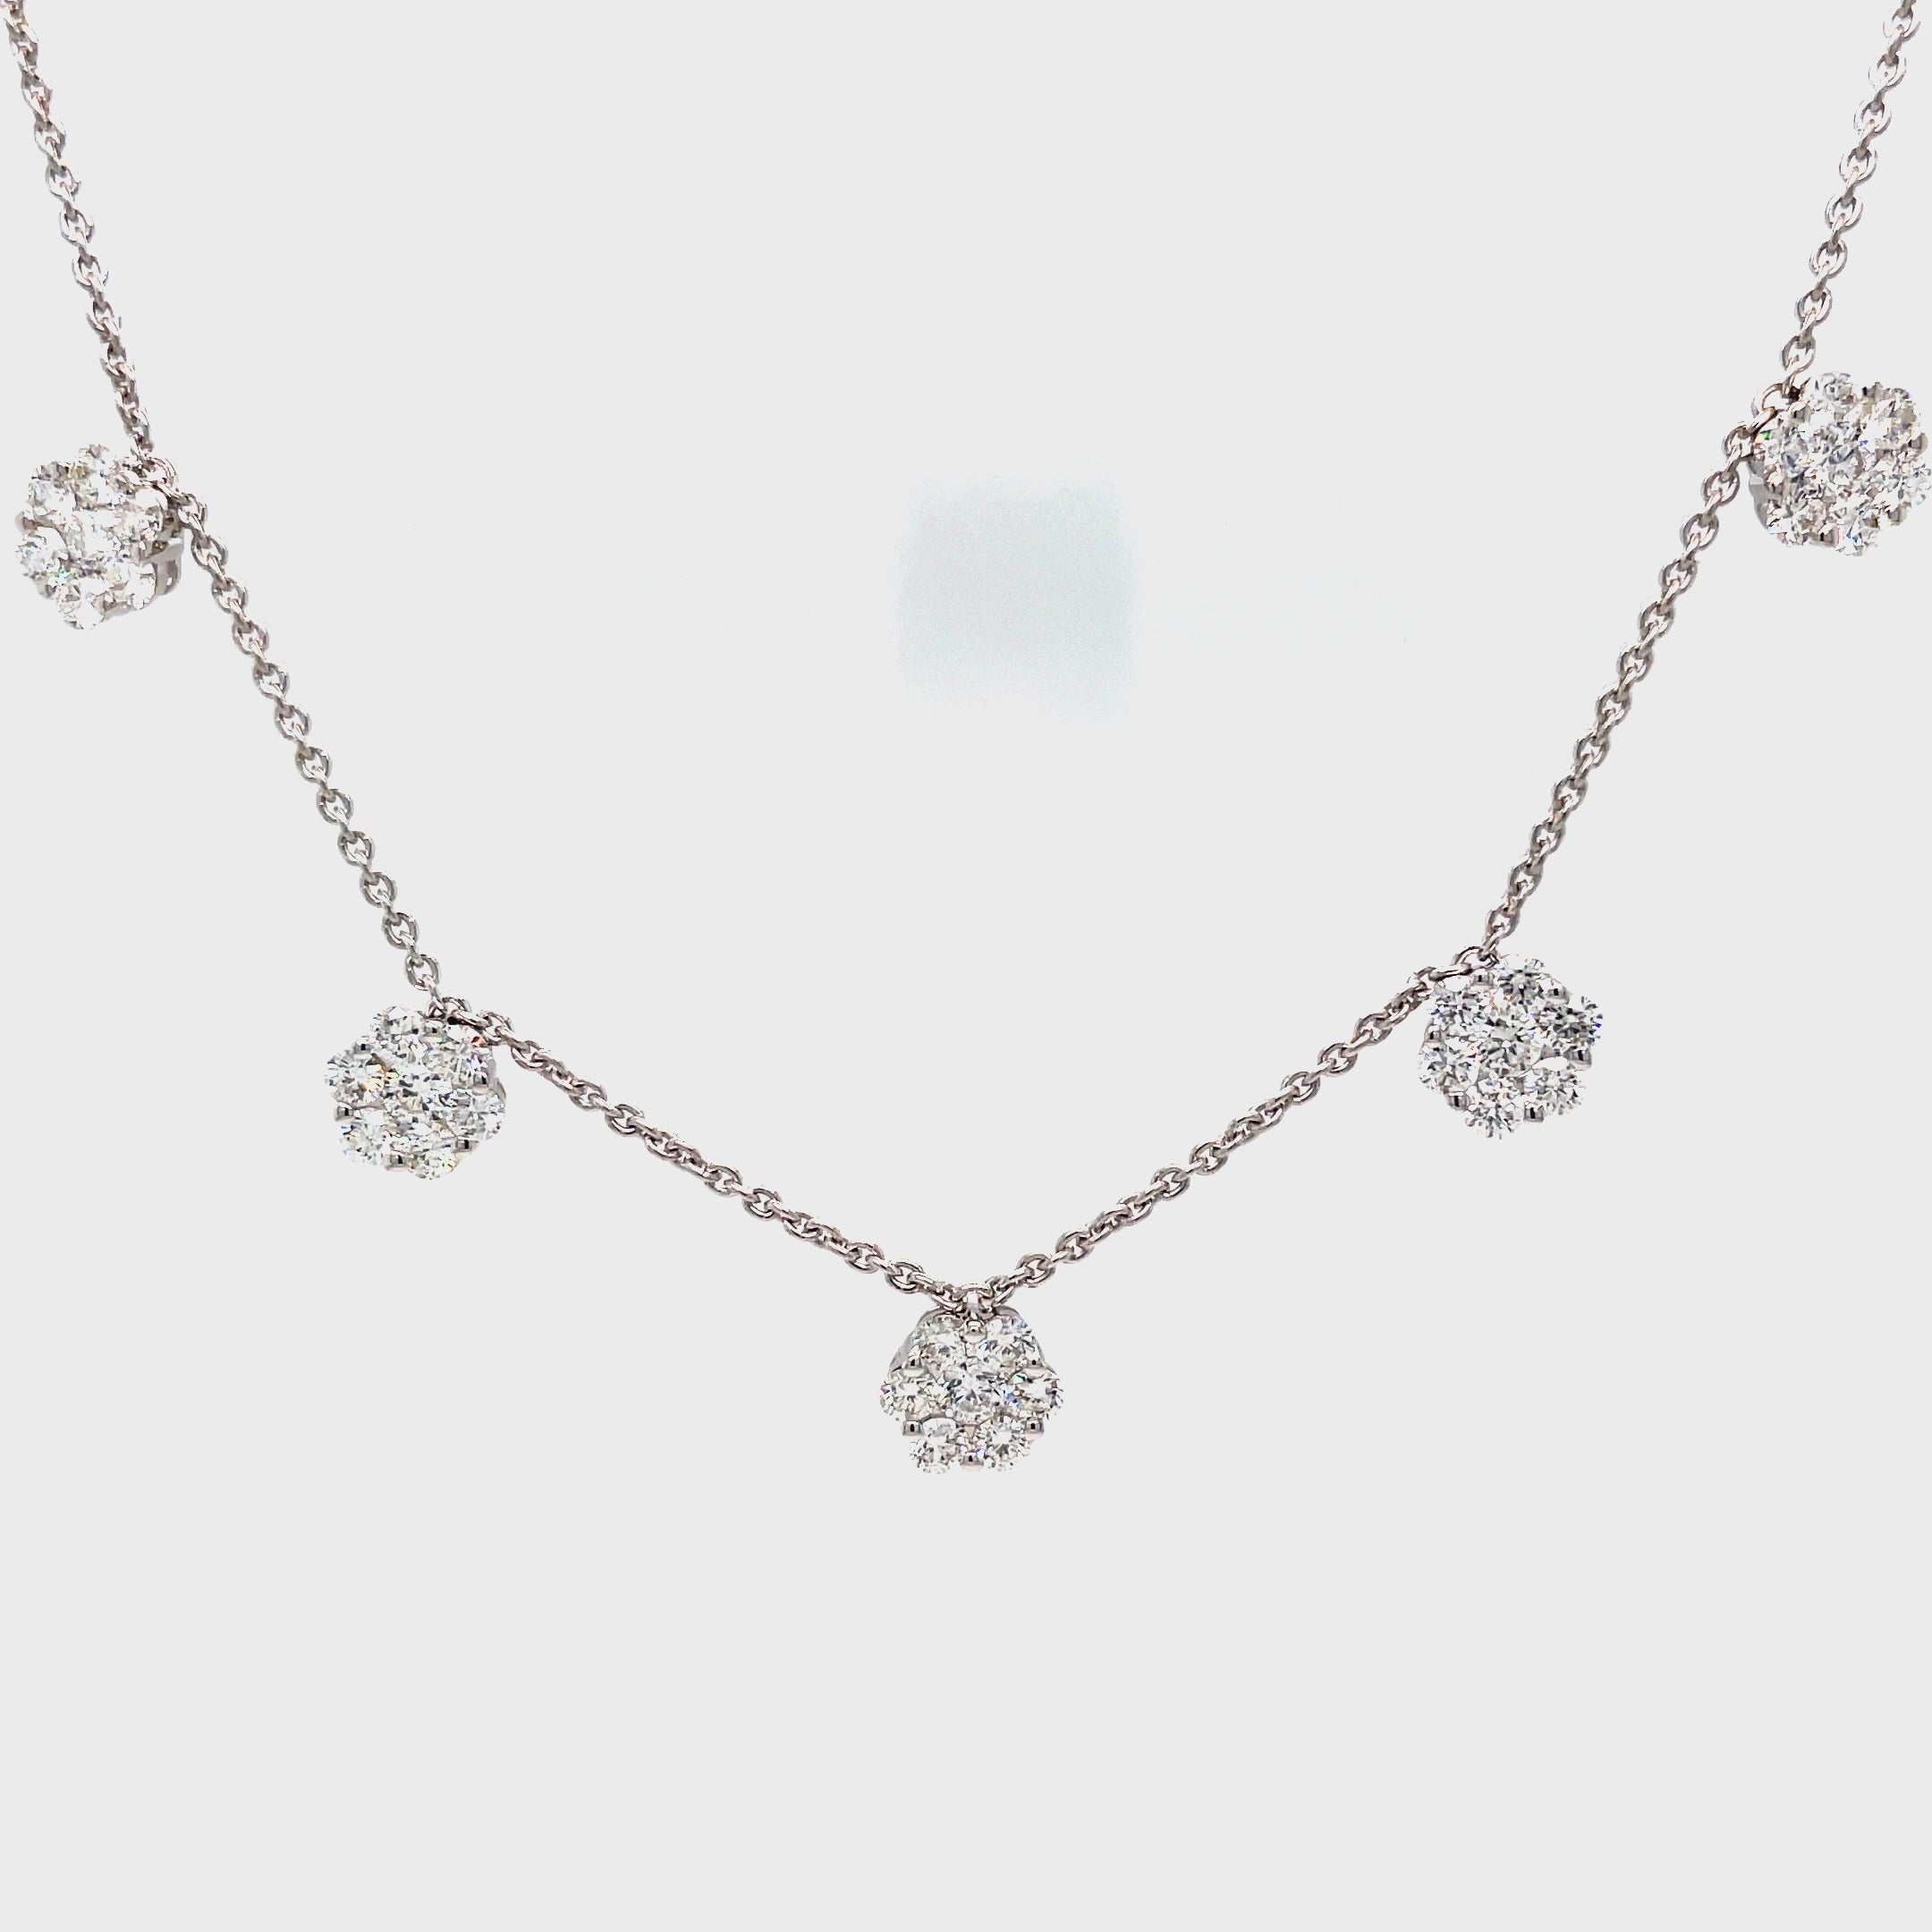 Elevate any outfit with this 18k white gold necklace featuring five stunning flower design charms adorned with sparkling 2.12 cts of white round diamonds. The F/G color of the diamonds add a touch of elegance, while the secured lobster catch ensures a worry-free wear. The 18" length is perfect for layering and completing your look.